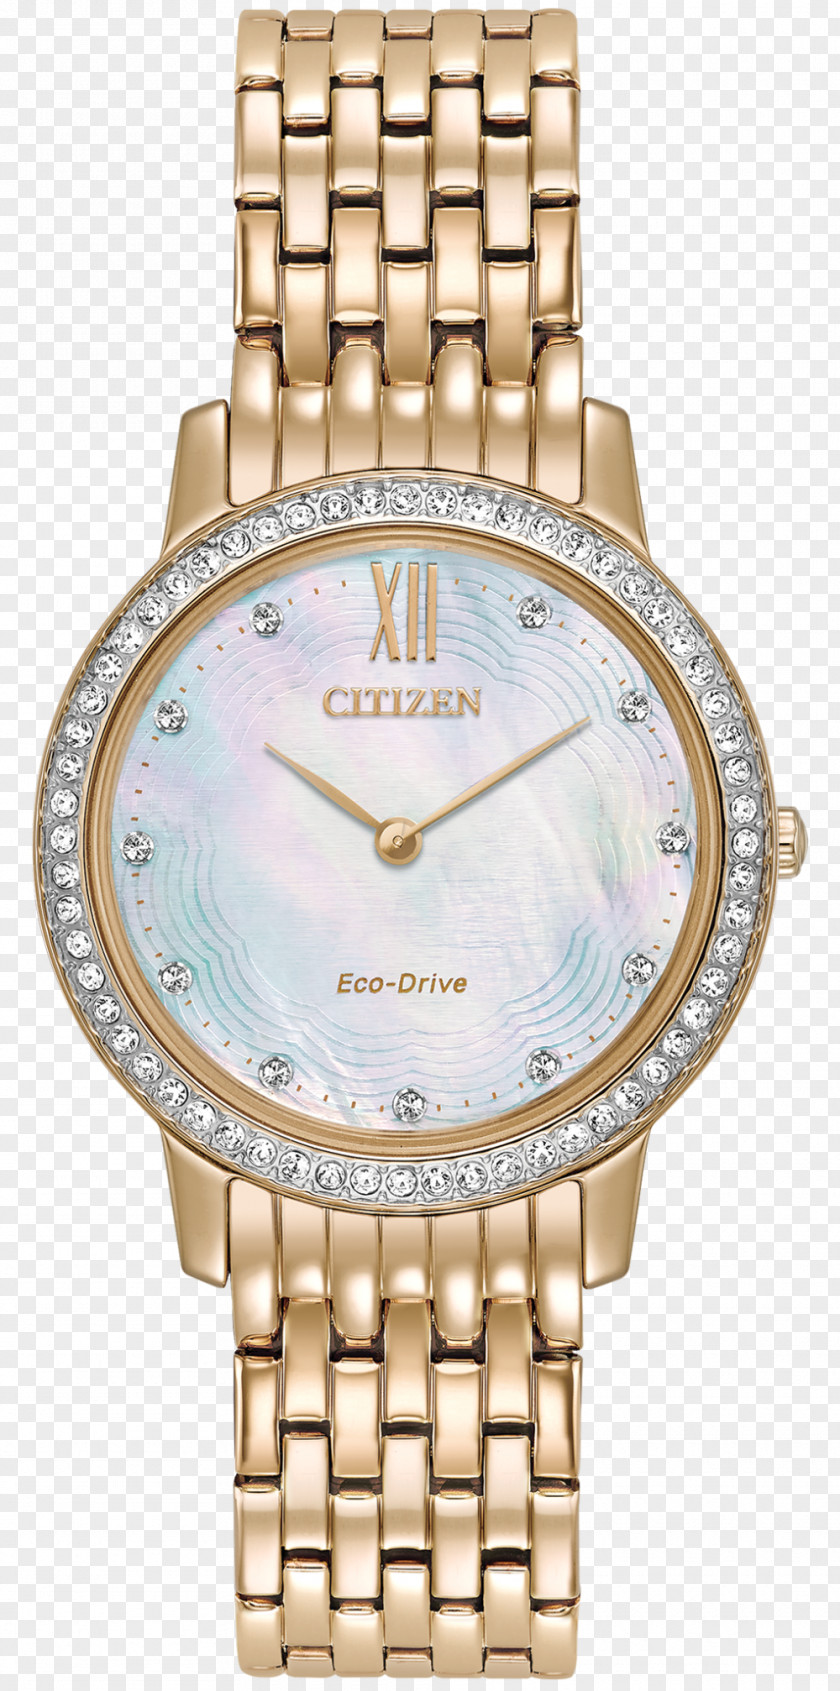 Jewellery Eco-Drive Watch Citizen Holdings Gold PNG